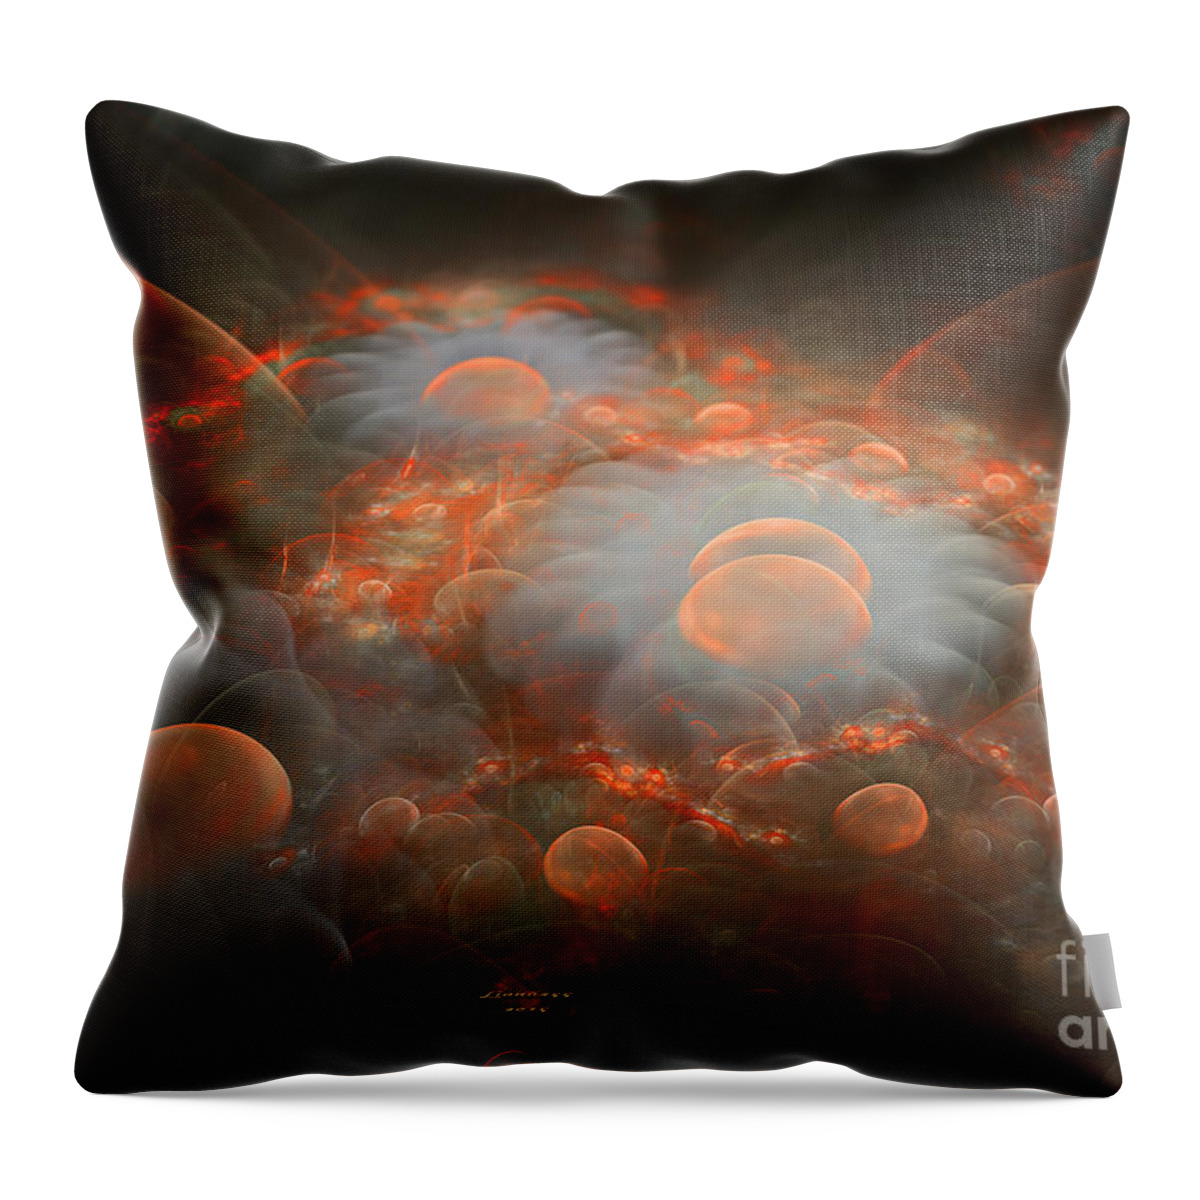 Ractal Throw Pillow featuring the digital art Fractals In The Valley by Melissa Messick